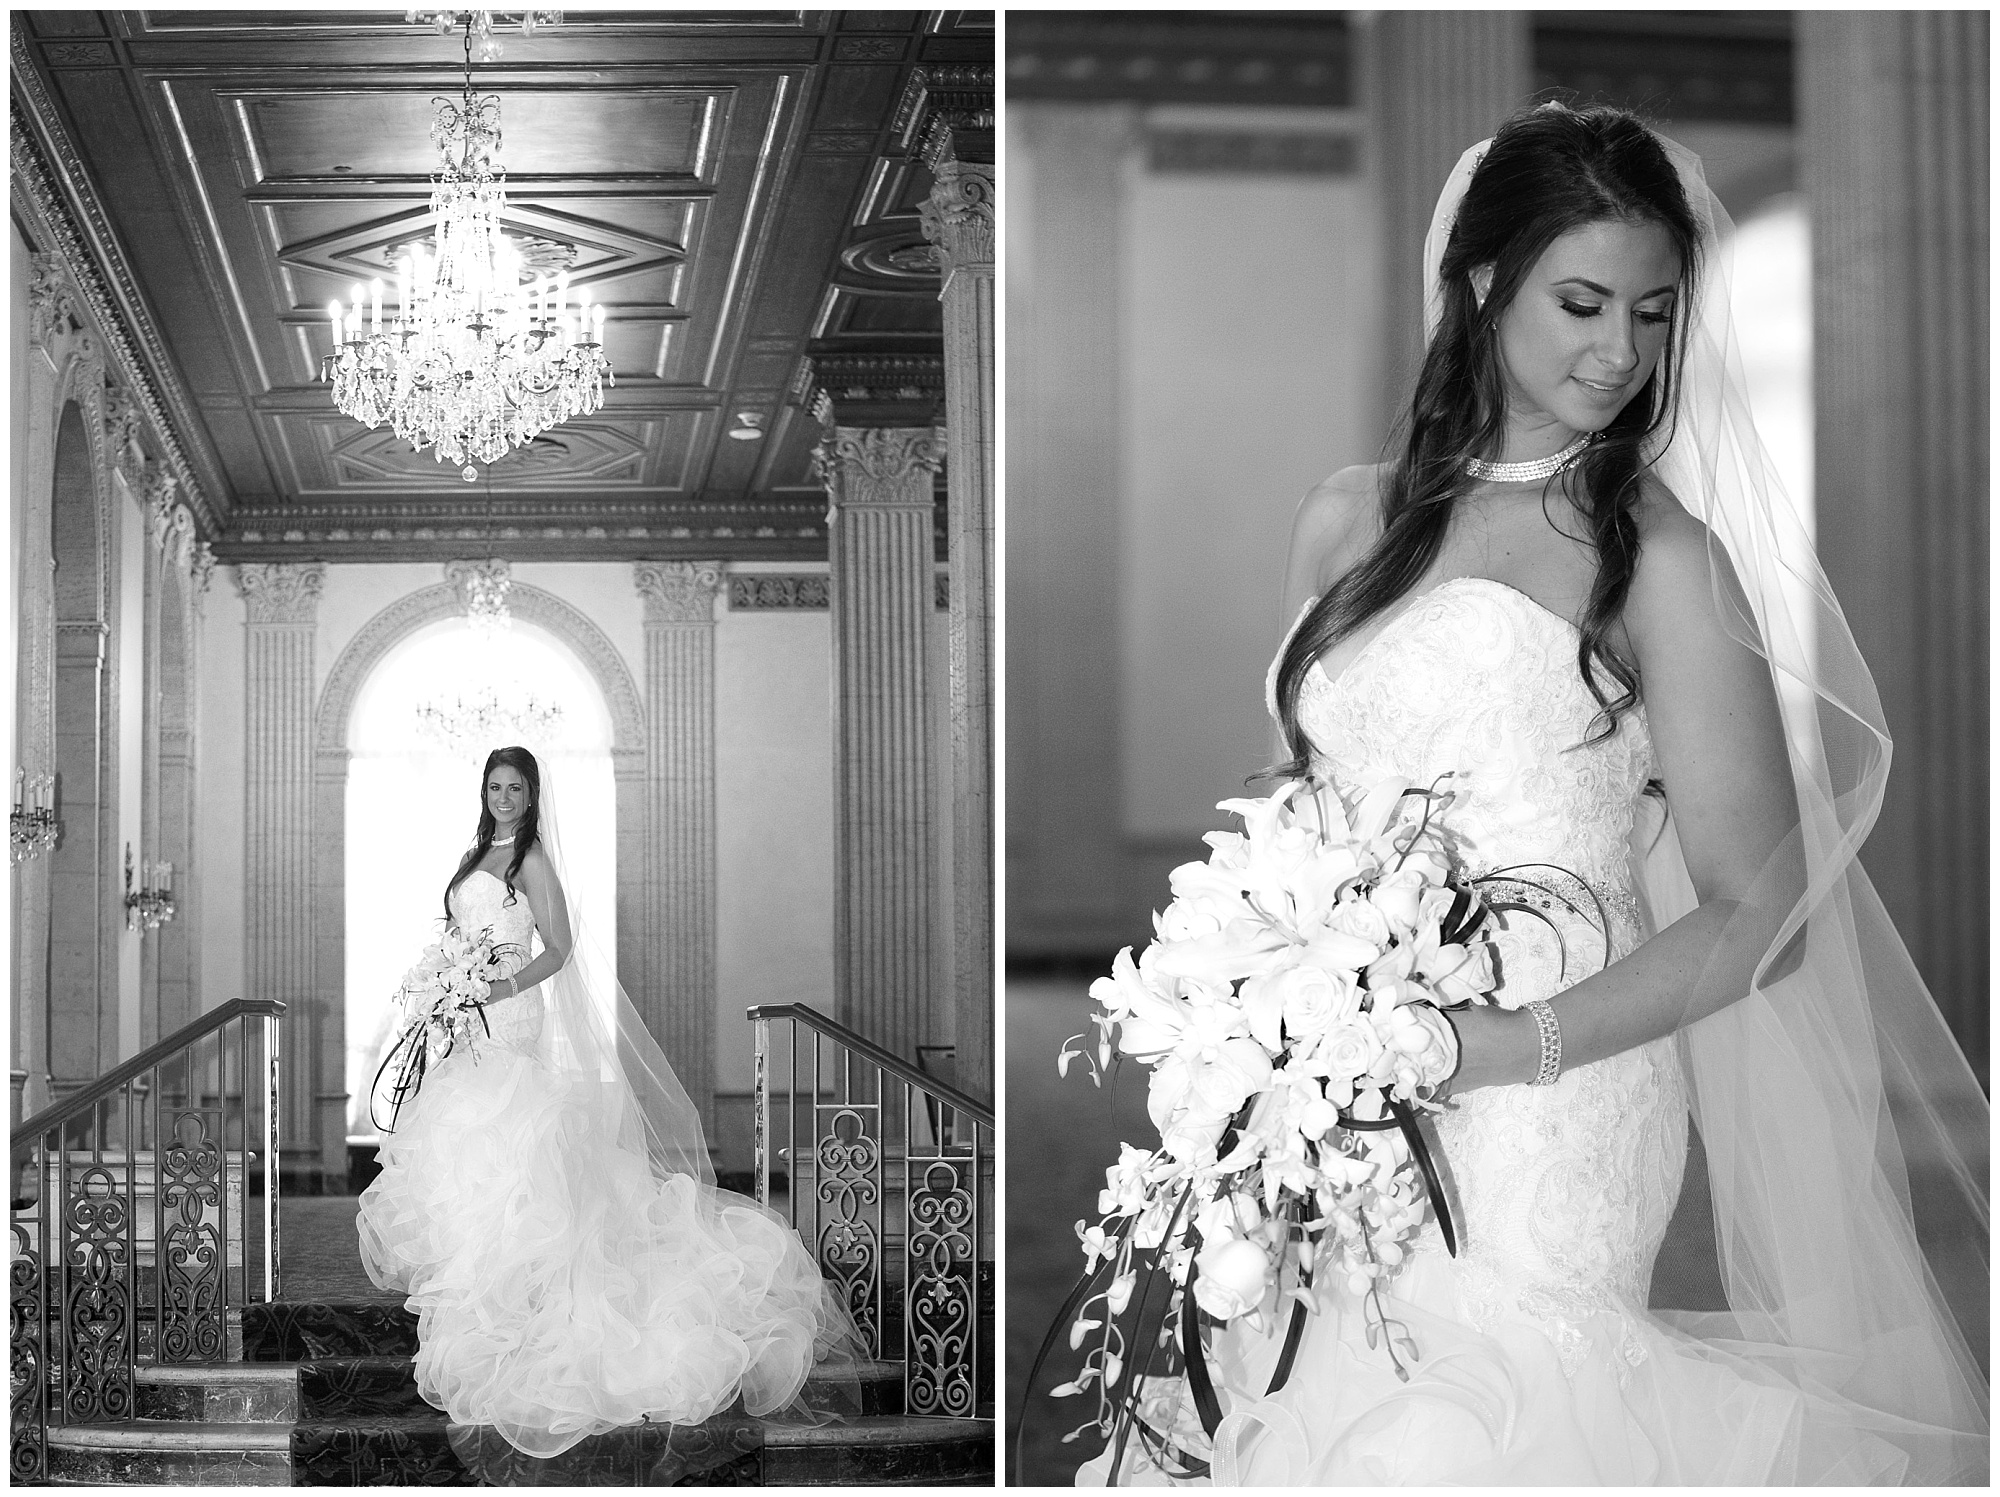 Two photo of a bride's portraits, one is full body, the second is three quarters body.